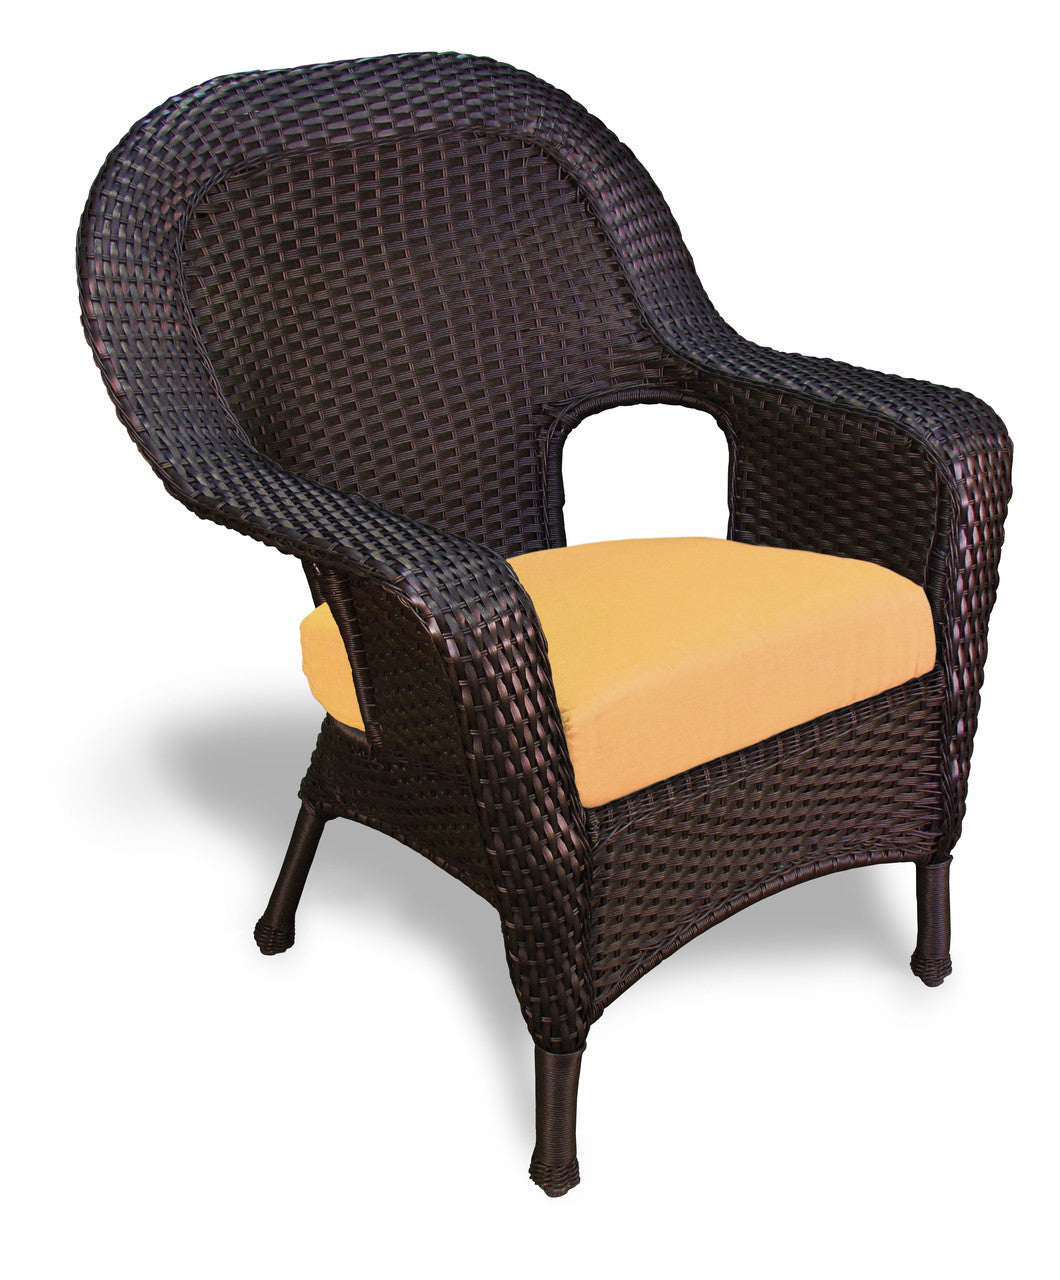 Tortuga Outdoor Sea Pines Resin Wicker Dining Chair